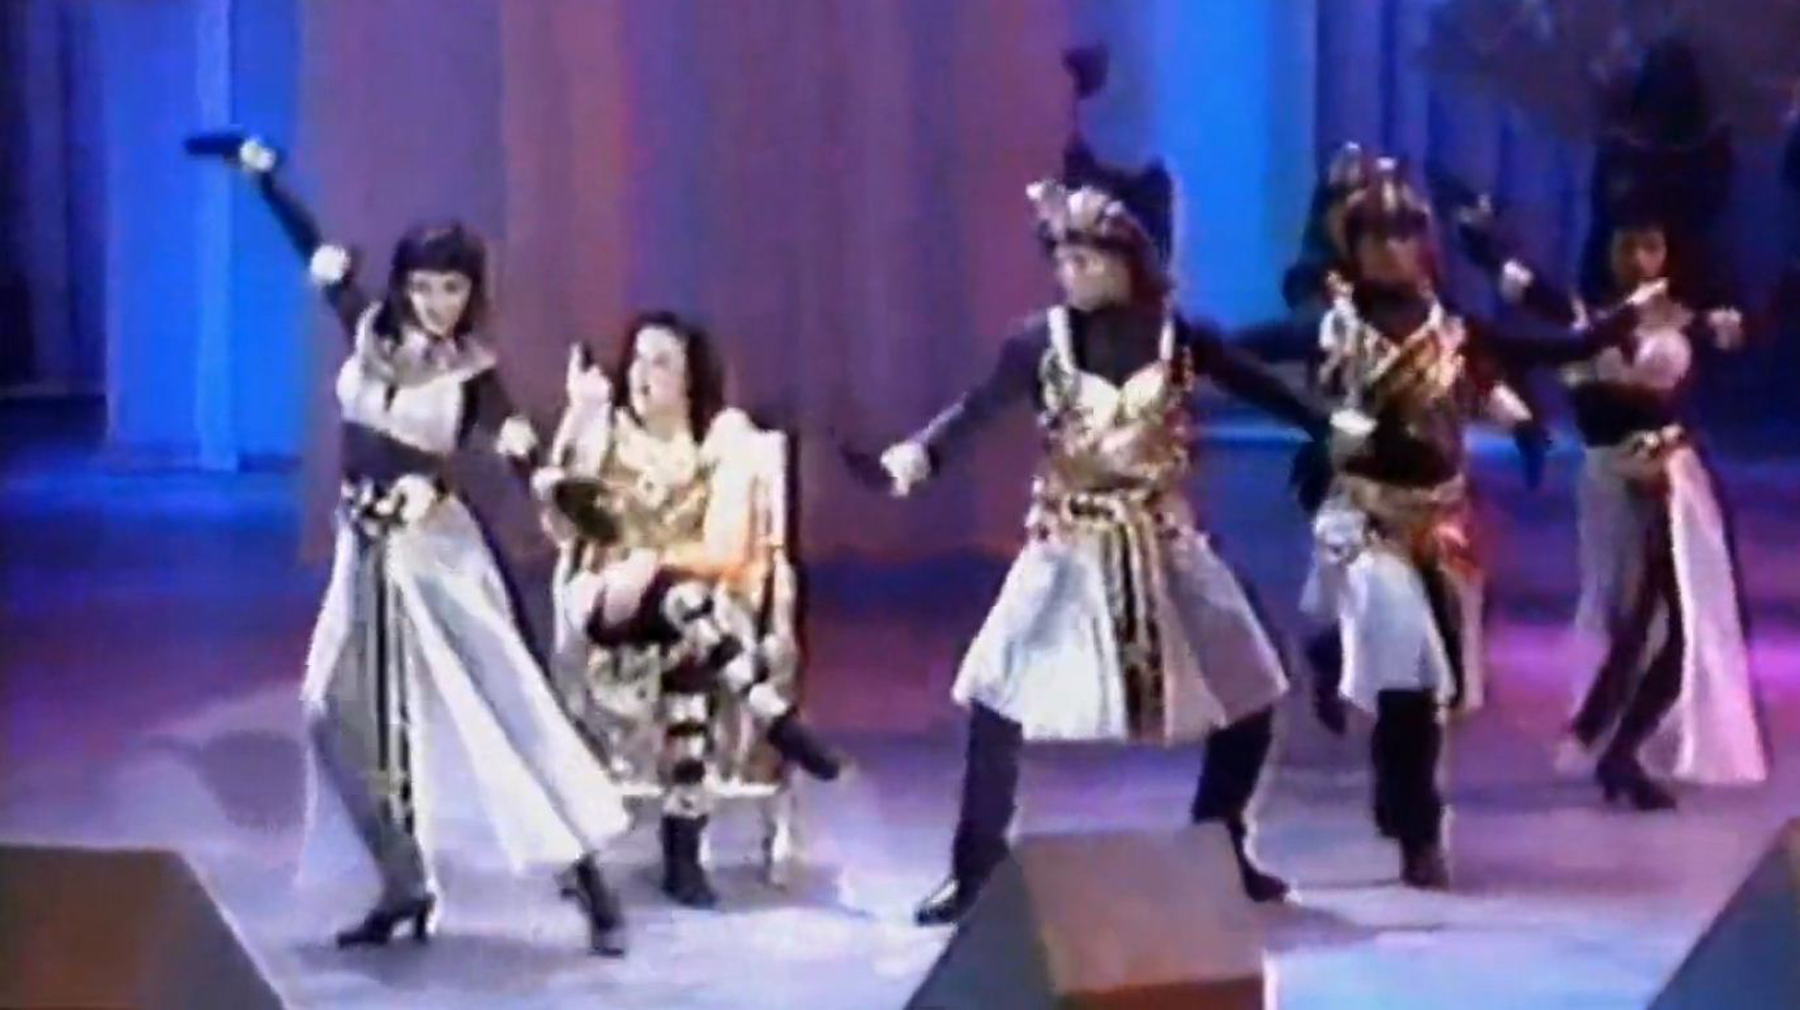 MICHAEL JACKSON: "REMEMBER THE TIME" COSTUMES  A group of costumes worn for the performance of - Image 13 of 16